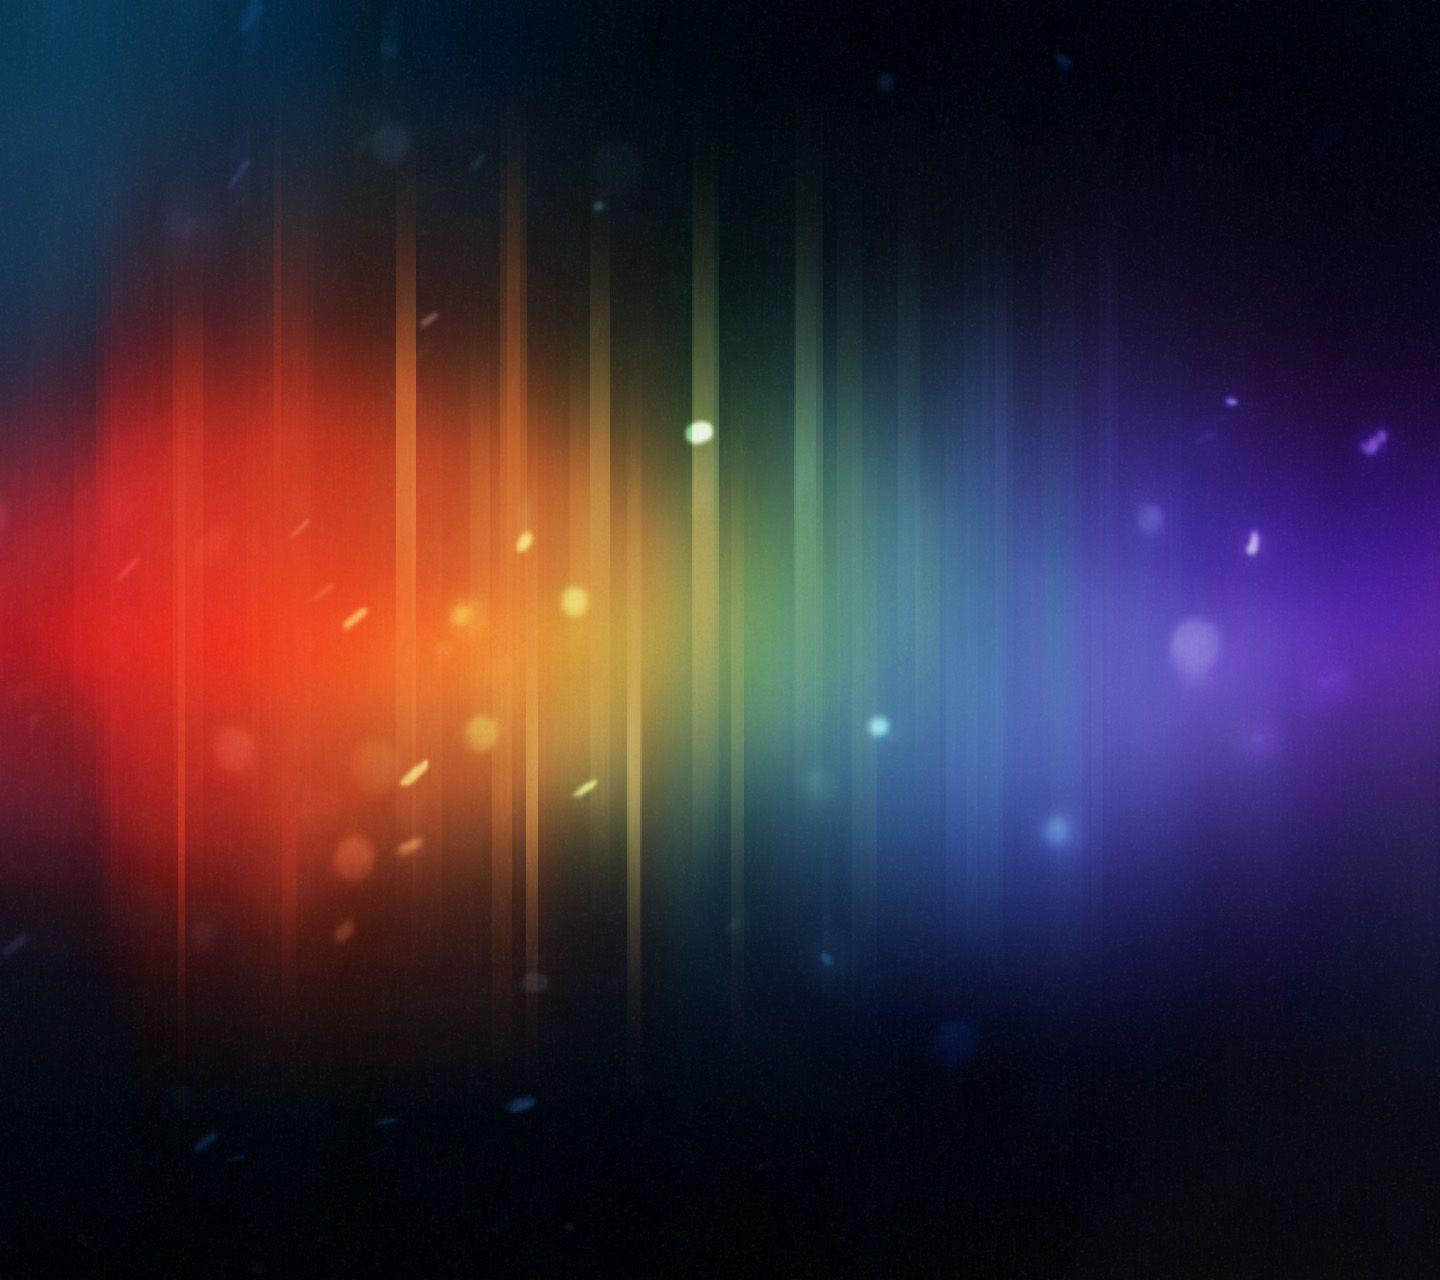 Android 4.1 Jelly Bean Stock Wallpaper 09 - [1440 x 1280]